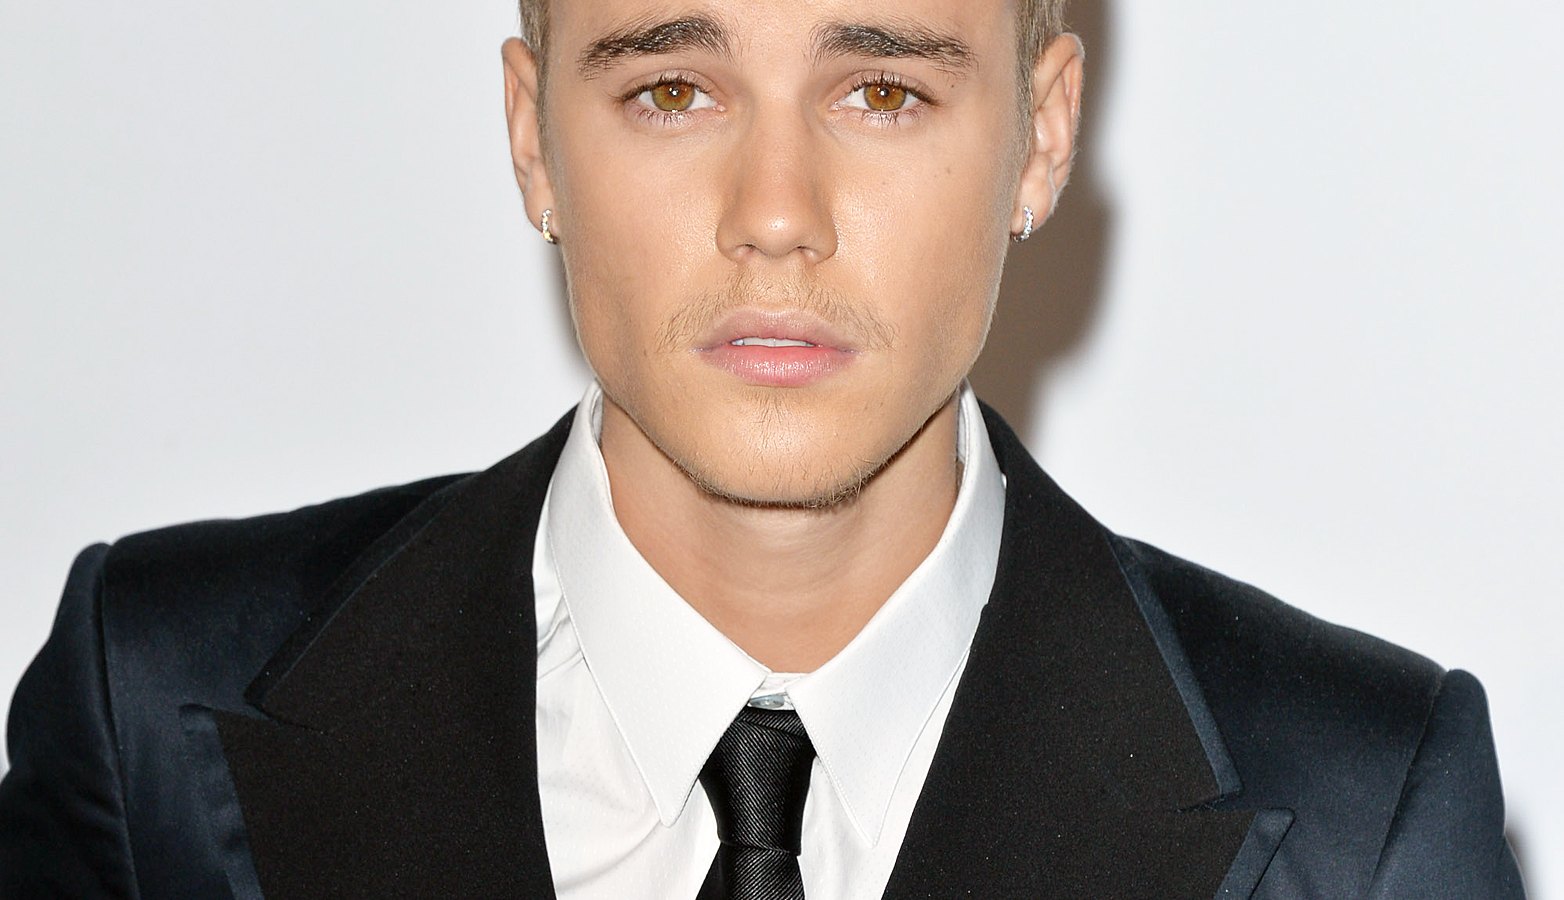 Justin Bieber attends an event on May 22, 2014